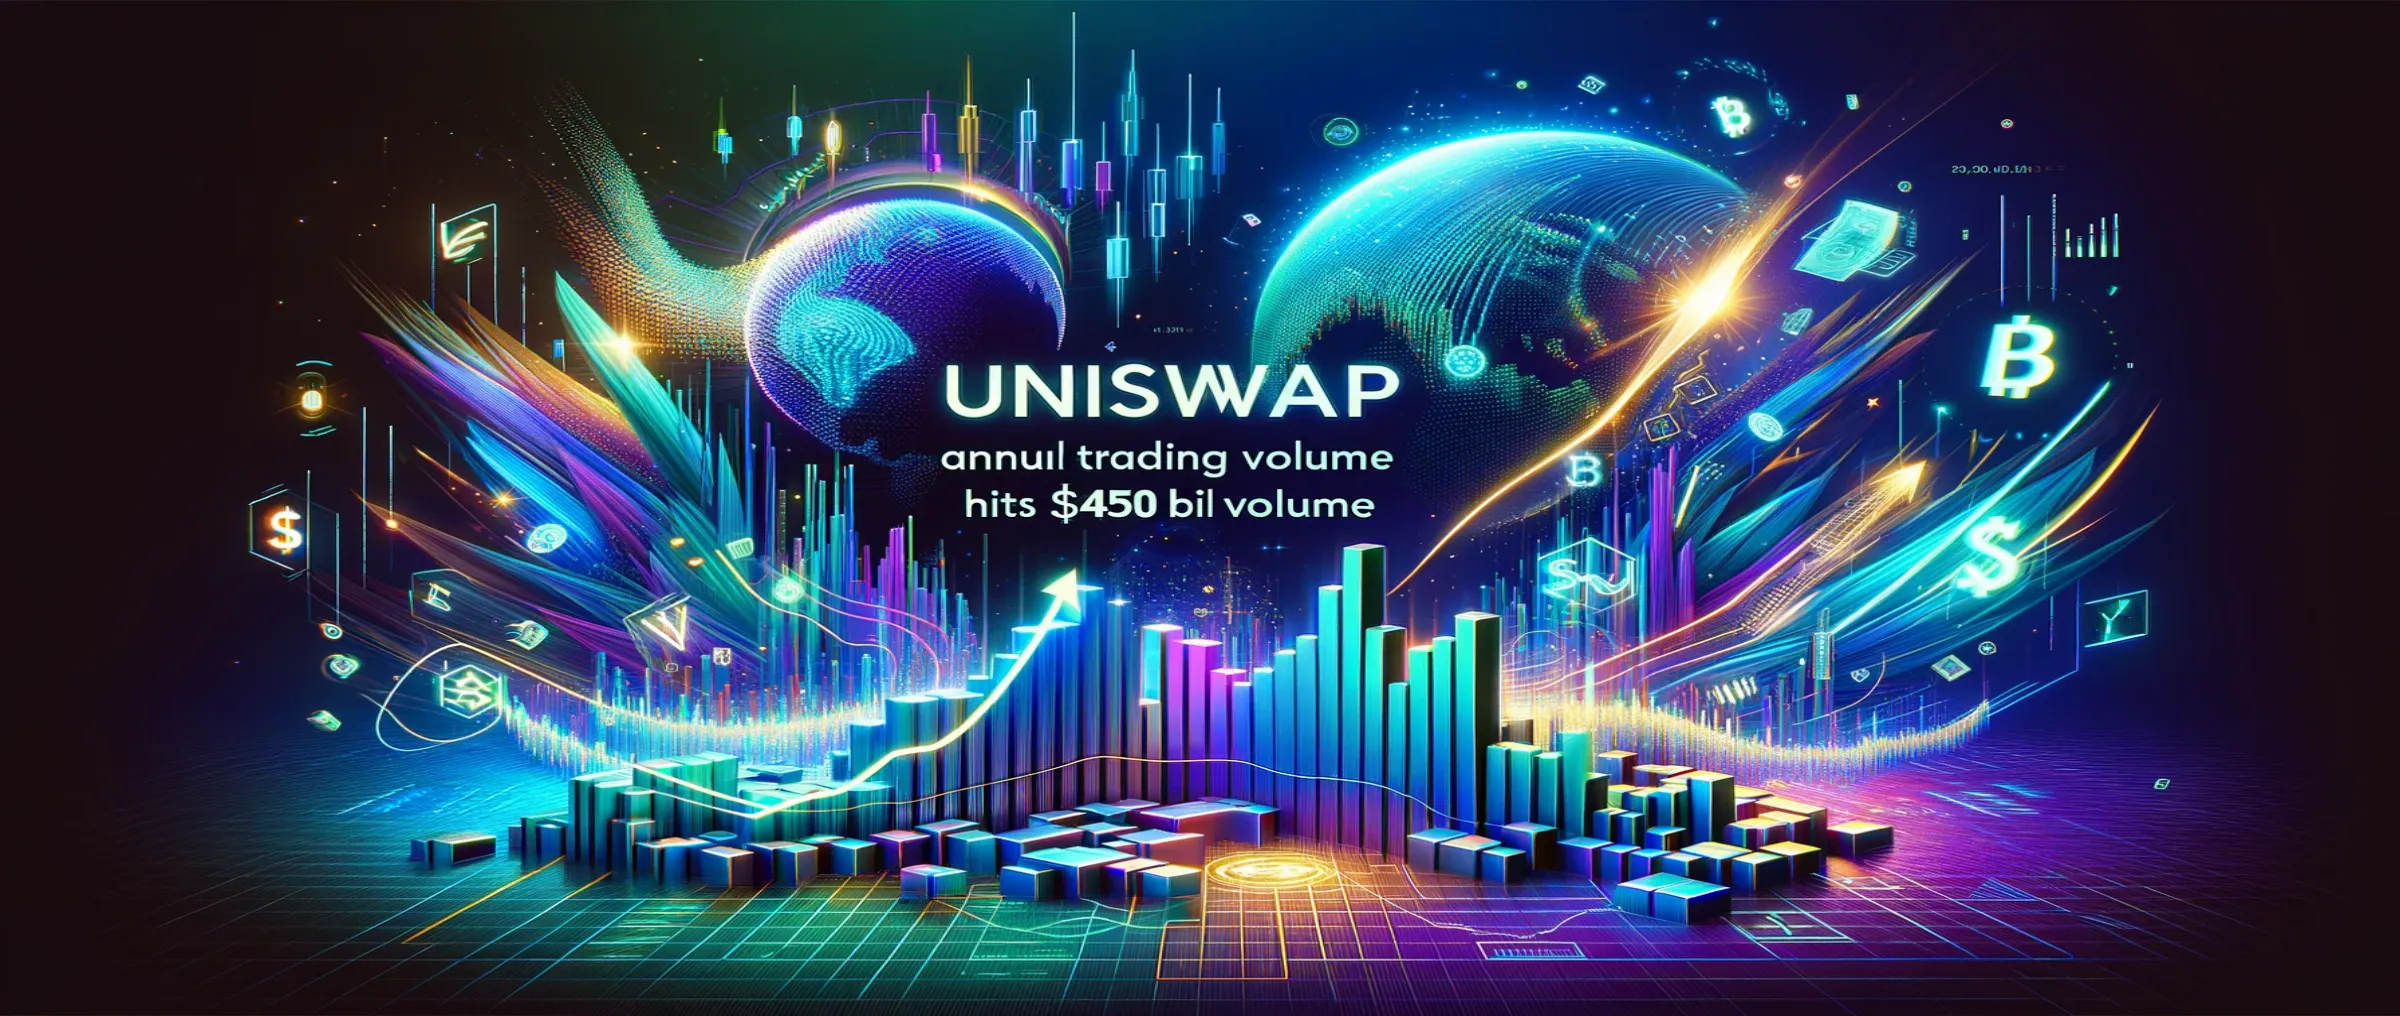 The volume of trade on Uniswap reached $450 billion in a year